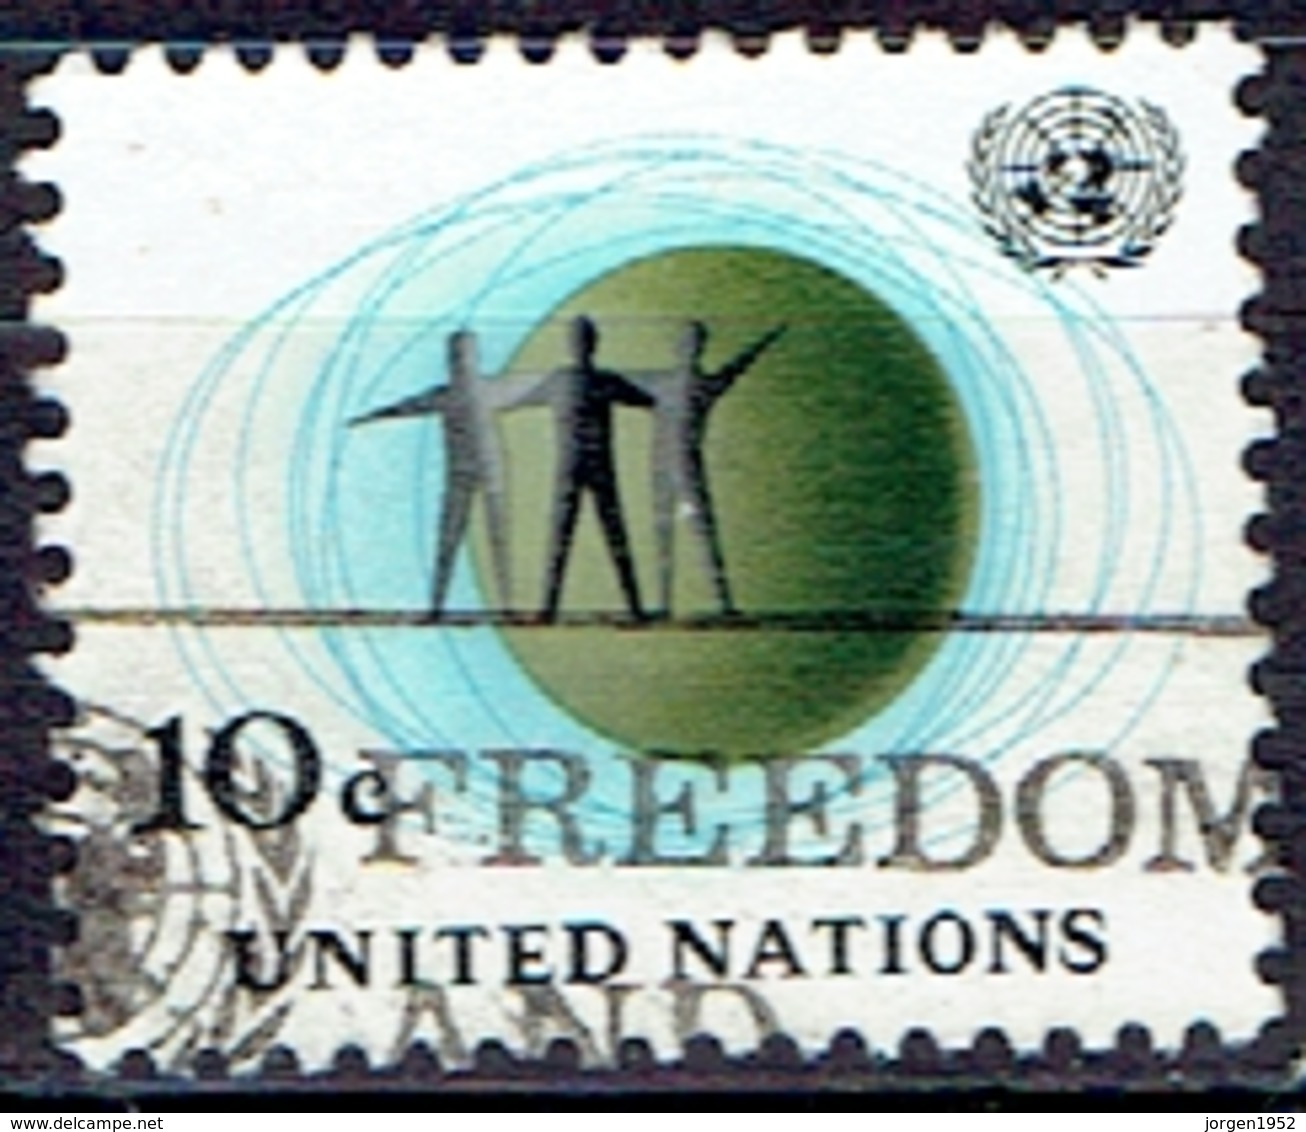 UNITED NATIONS # FROM 1961 STAMPWORLD 103 - Oblitérés